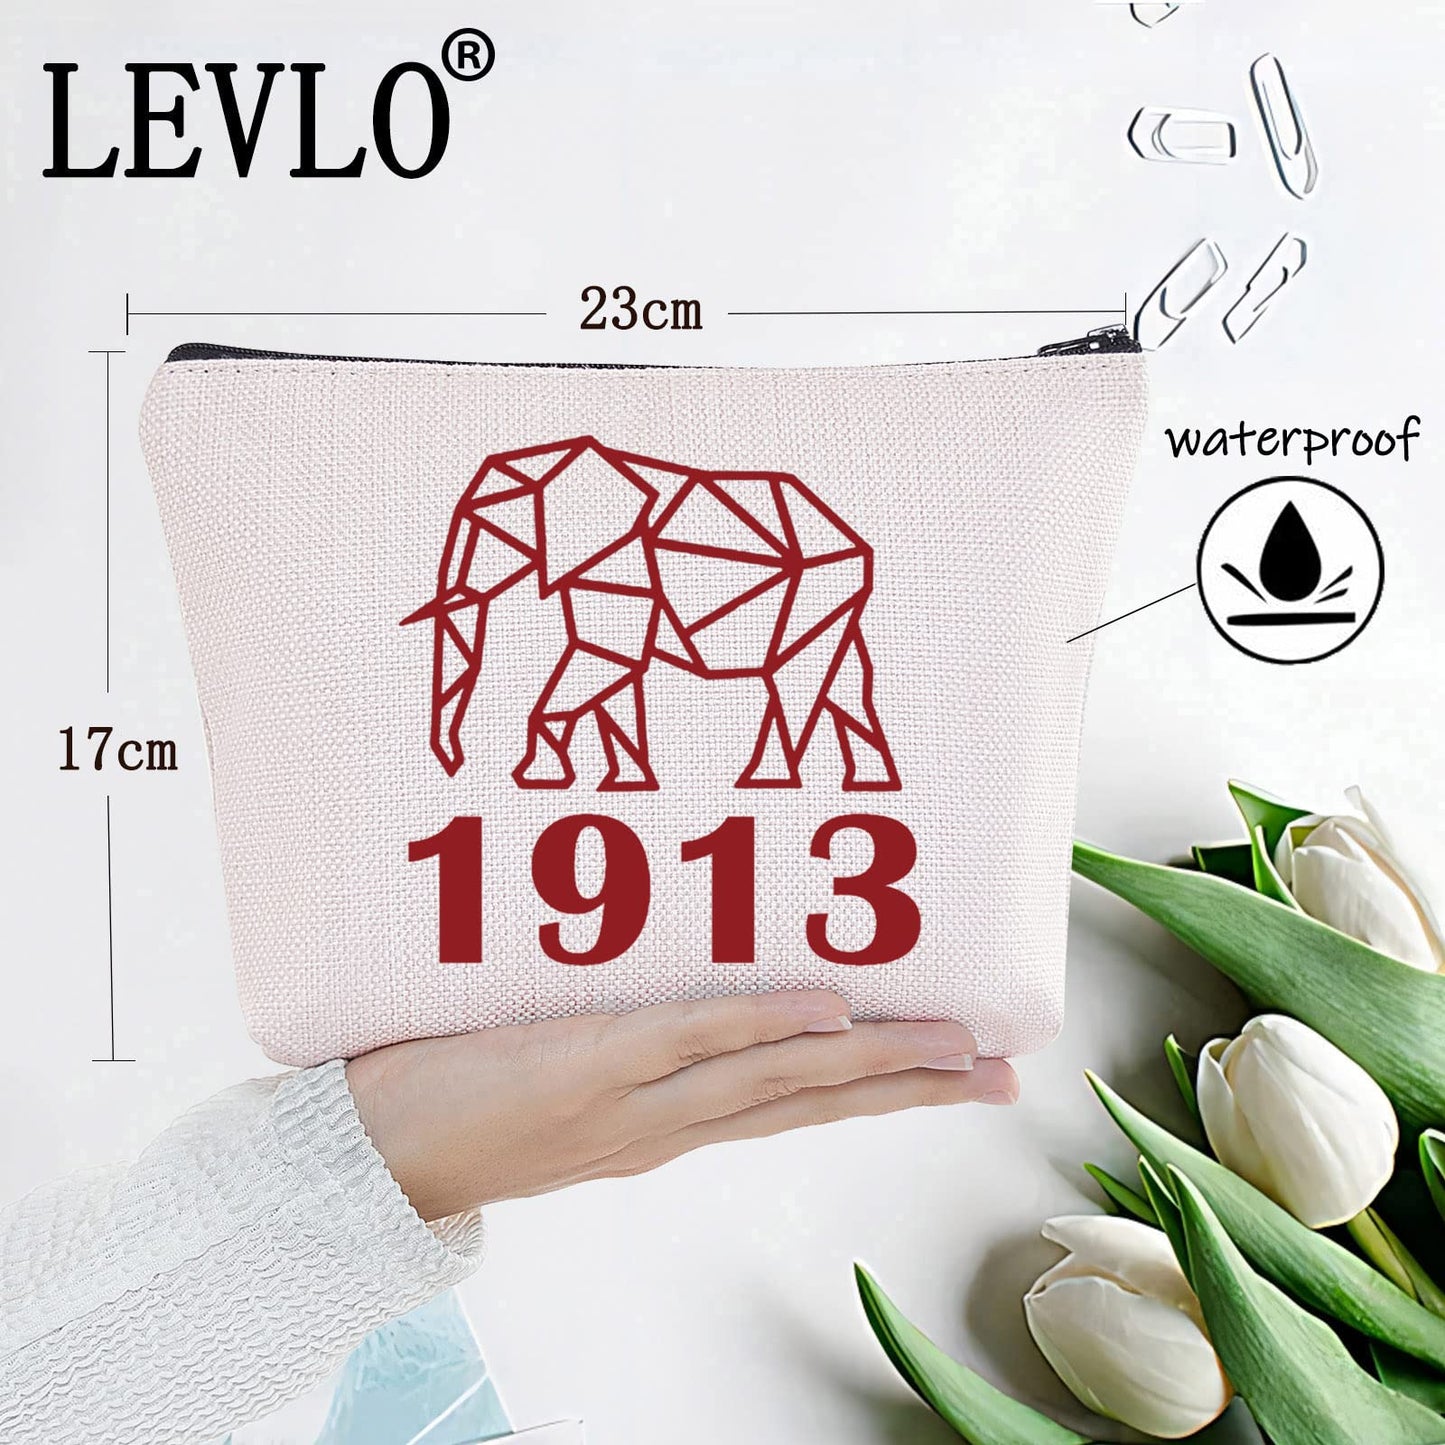 LEVLO DST Theta Sorority Cosmetic Make Up Bag DST Elephant Sorority Gifts Sister Friend Makeup Zipper Pouch Bag For Sisters Feiend(Sister Friend)